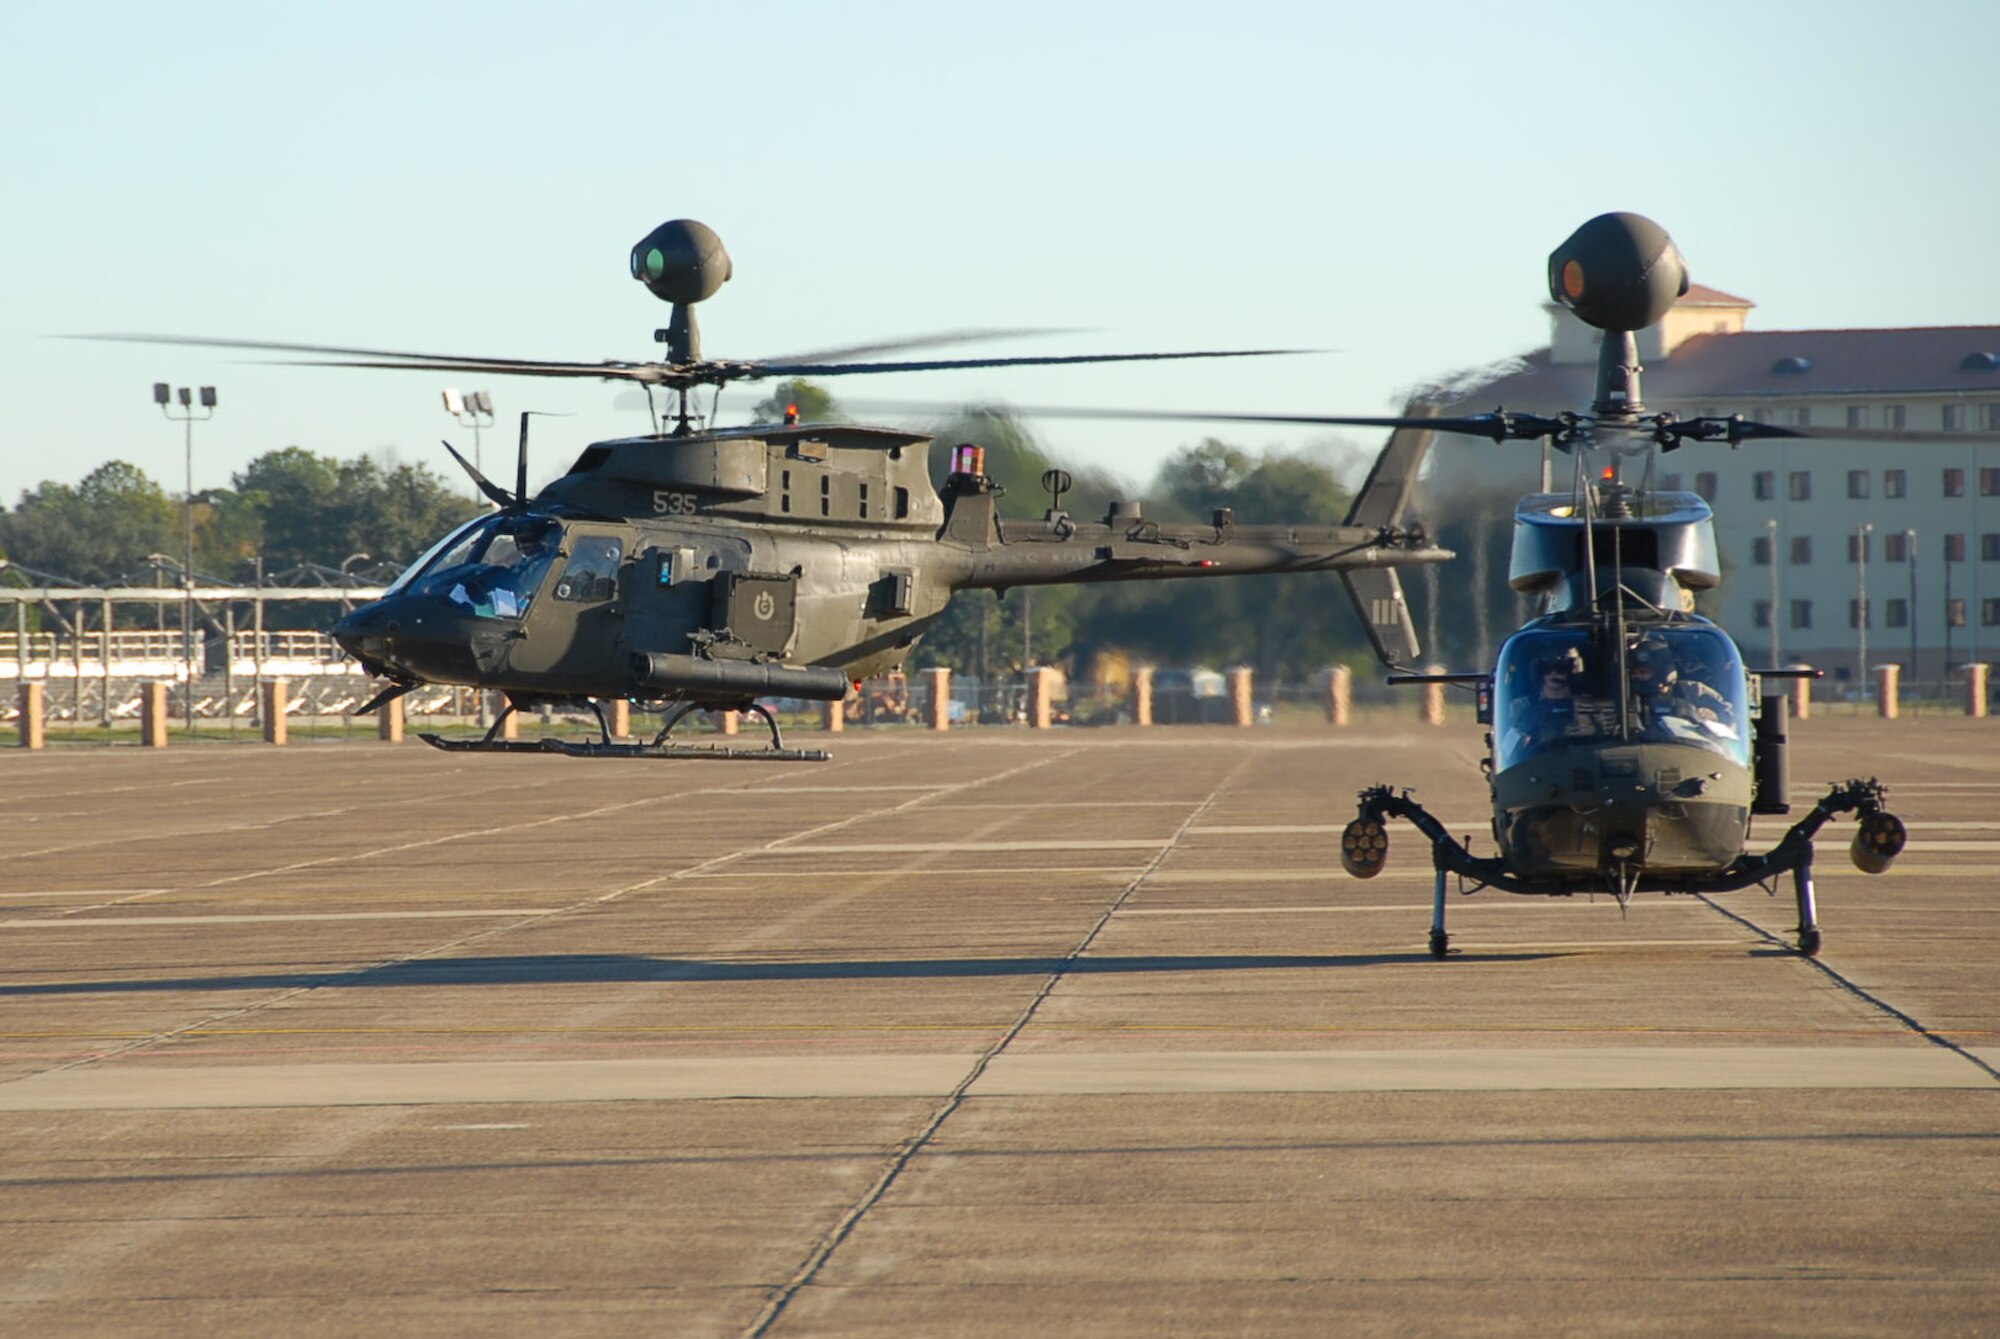 Two of more than 20 Army helicopters prepare to leave the Maxwell flight line after an overnight stay at the base Jan. 9. The aircraft were en route from Fort Bragg, N.C., to the Army’s Joint Readiness Training Center at Fort Polk, La. Maxwell Air Force Base is used on a regular basis by aircrews not assigned to the base for a variety of purposes to include re-fueling and lodging. (Air Force photo by Jamie Pitcher)